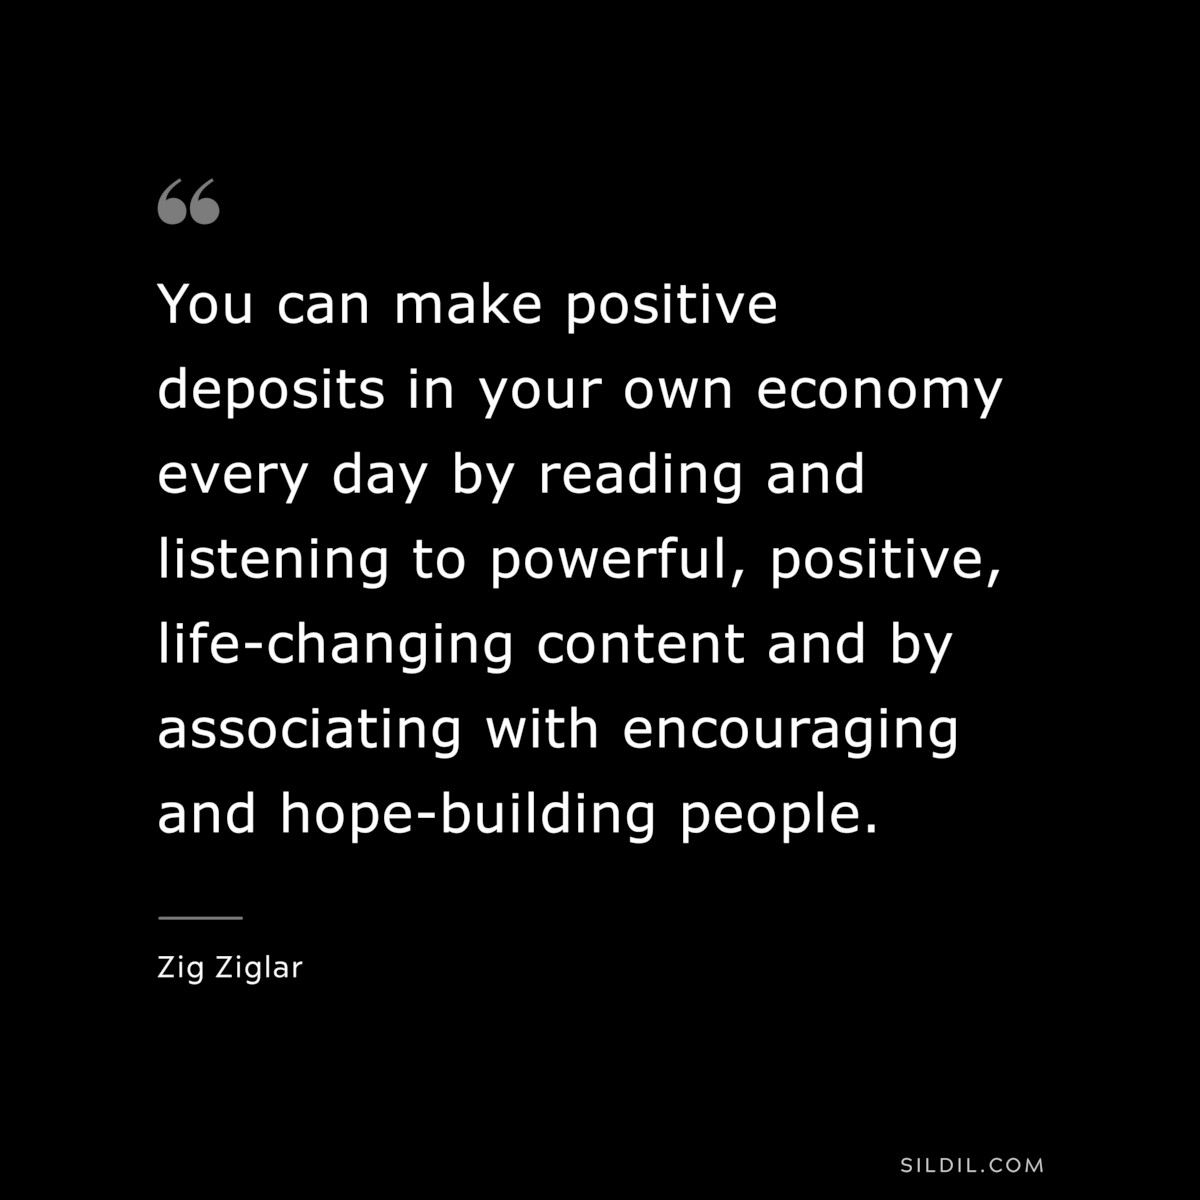 You can make positive deposits in your own economy every day by reading and listening to powerful, positive, life-changing content and by associating with encouraging and hope-building people. ― Zig Ziglar